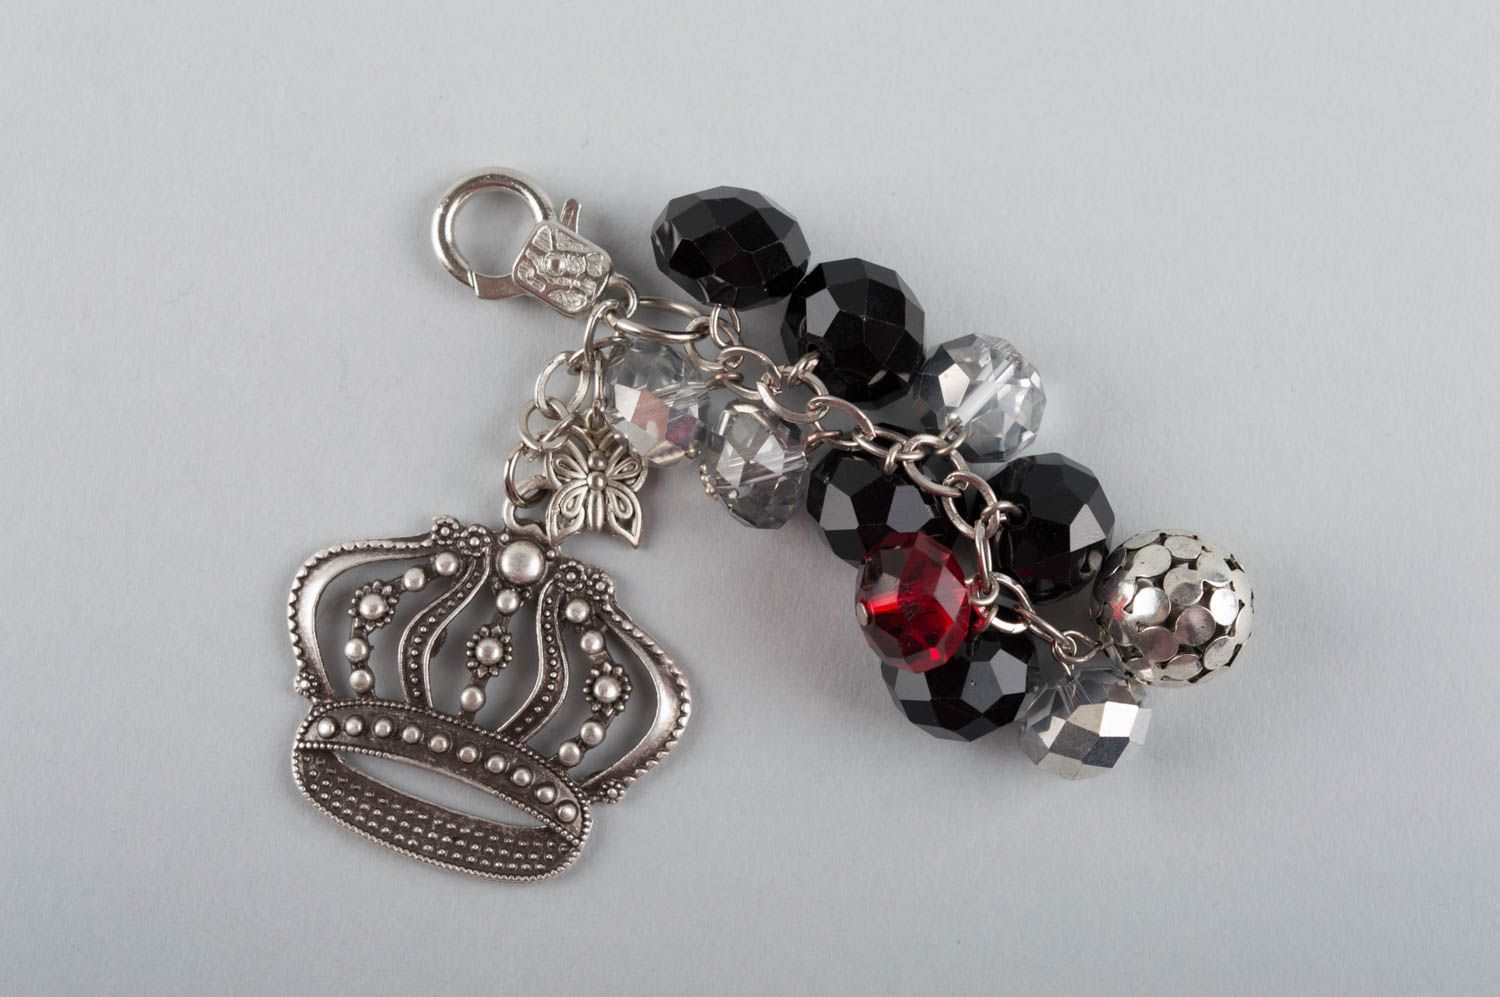 Handmade keychain made of glass beads with charm in shape of crown for girls photo 1